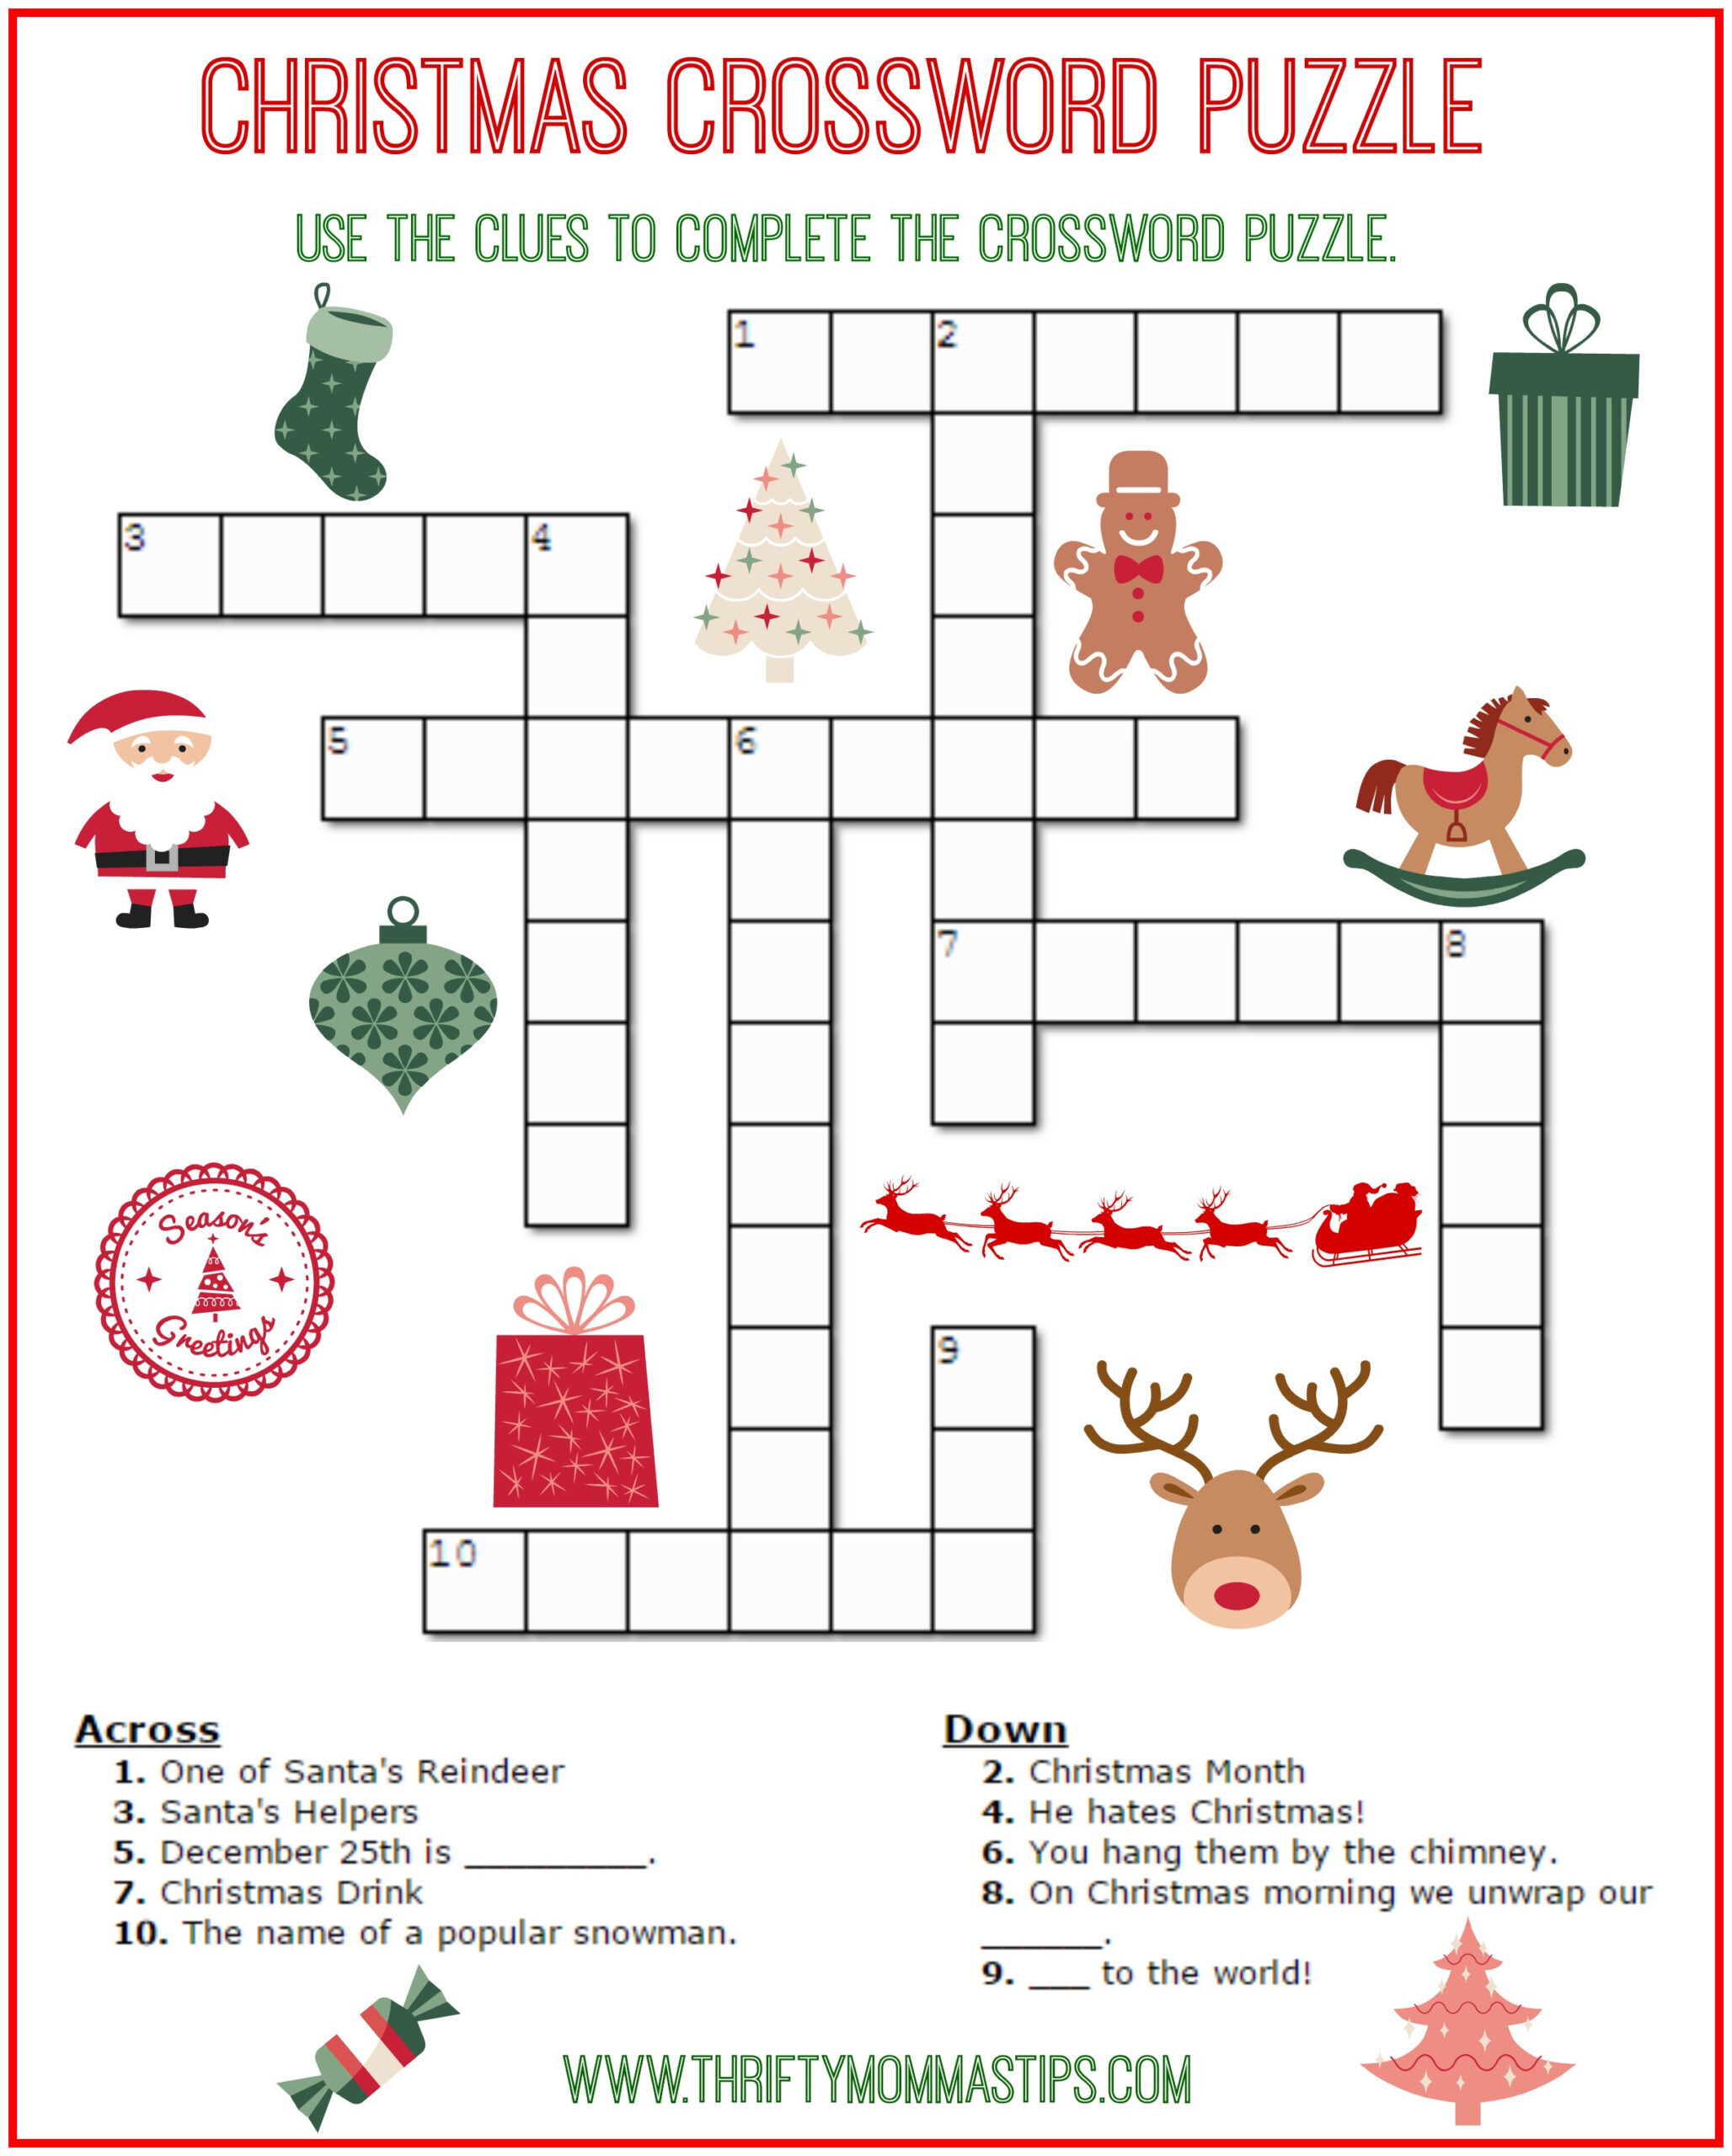 Christmas Crossword Puzzle Printable Thrifty Momma s Tips